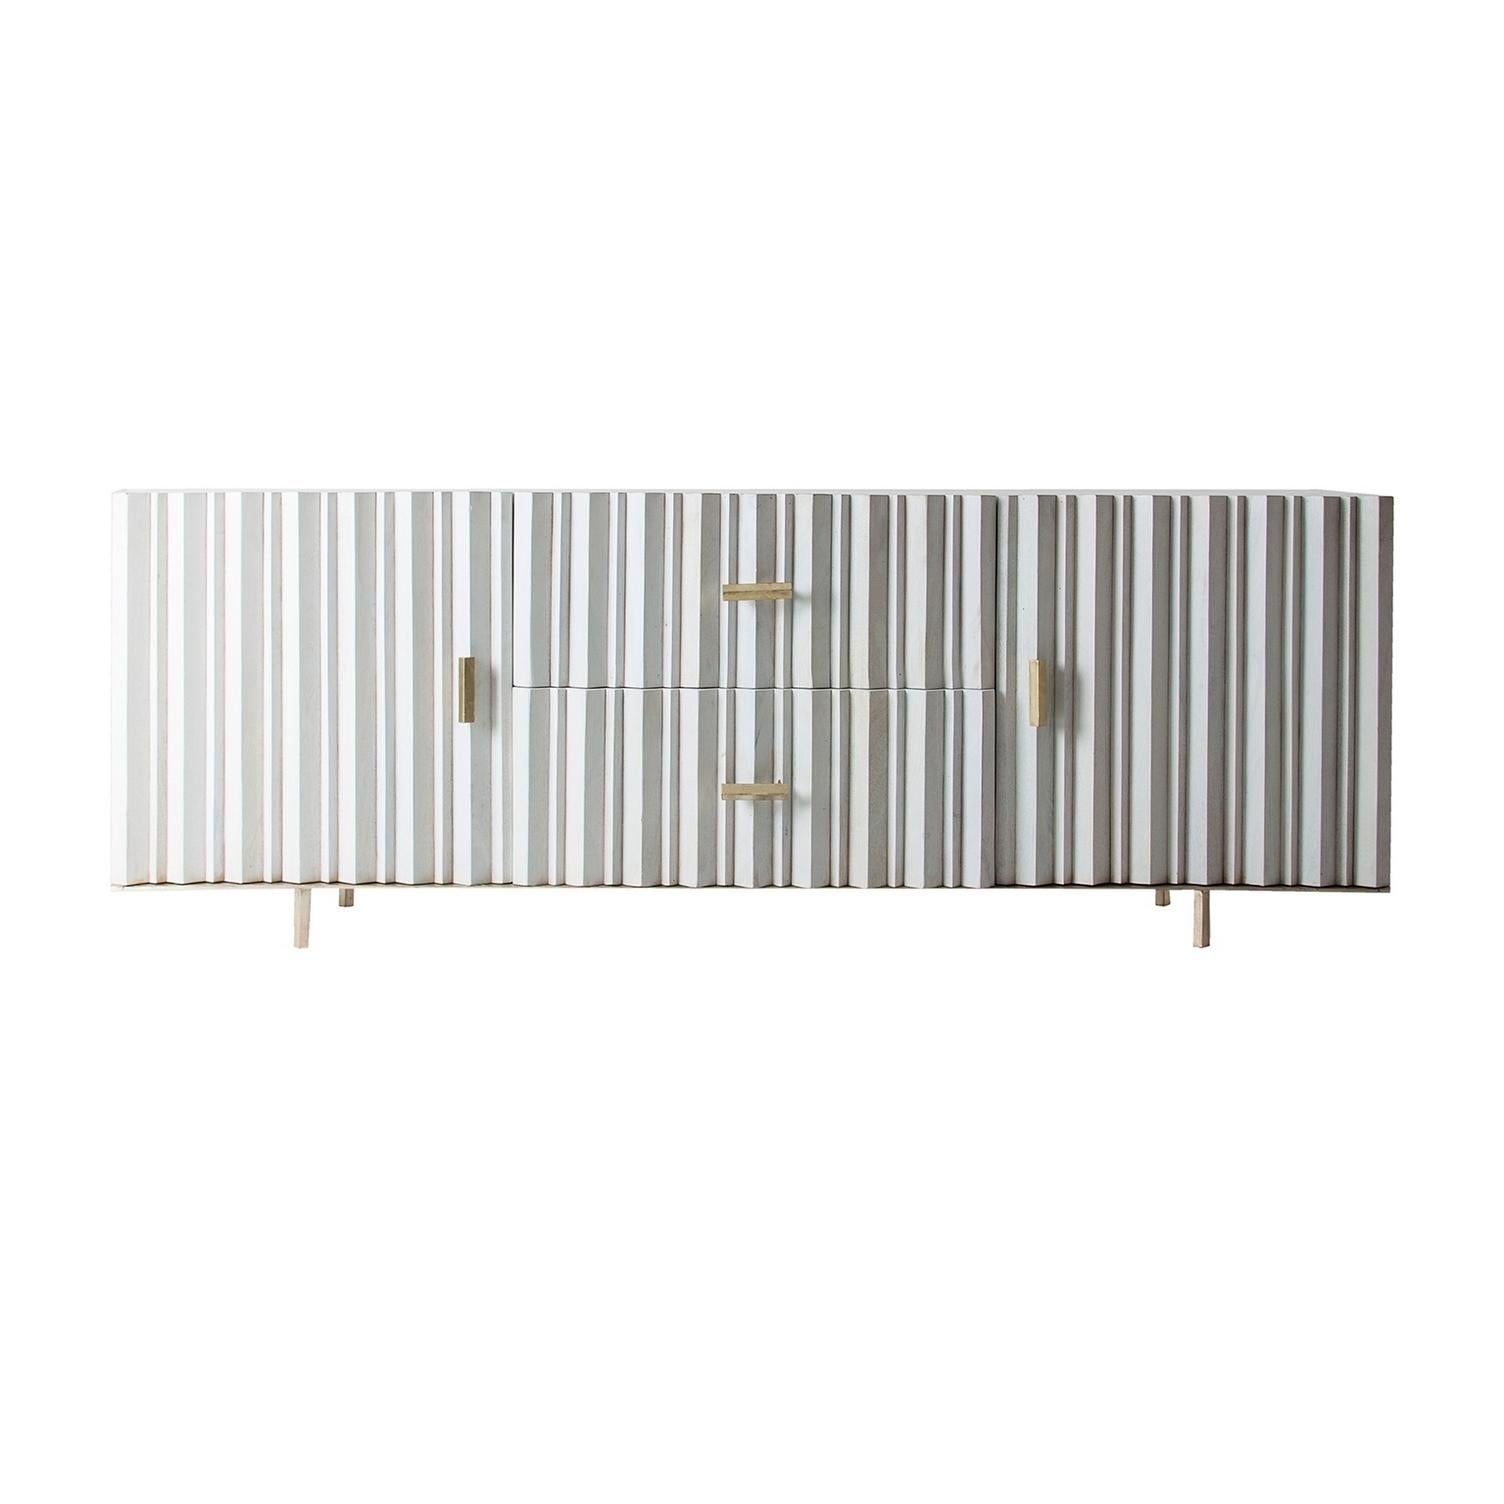 White Patina and gilded metal scandinavian design sideboard with graphic panels doors in Brutalist style shaped opening on shelves and 2 matching drawers in the middle.